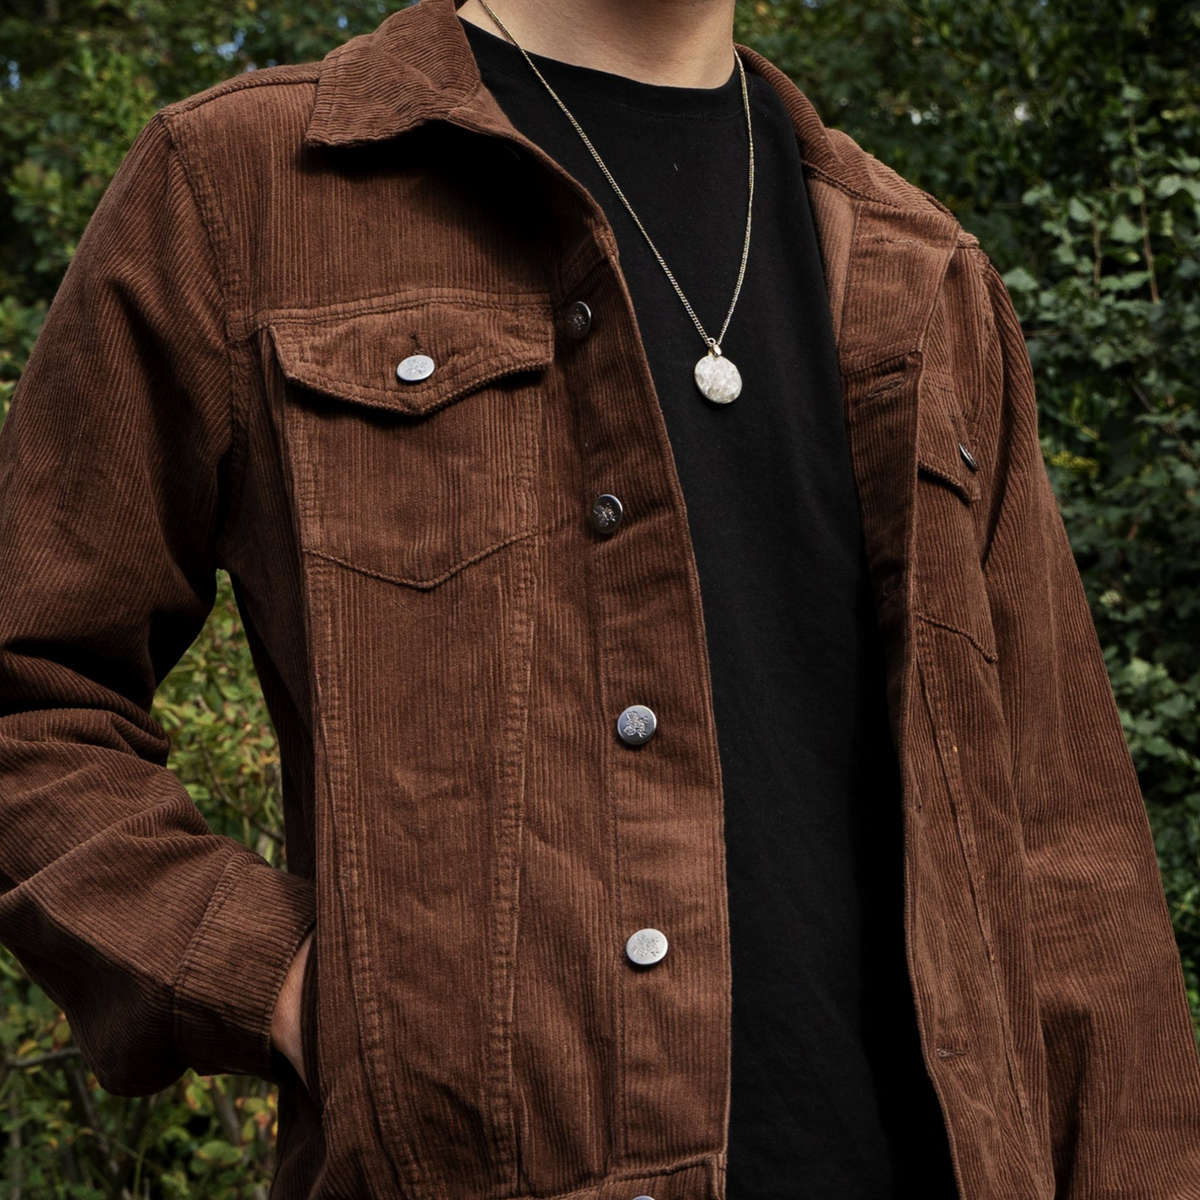 Corduroy Jacket Classic 60's Style Brown